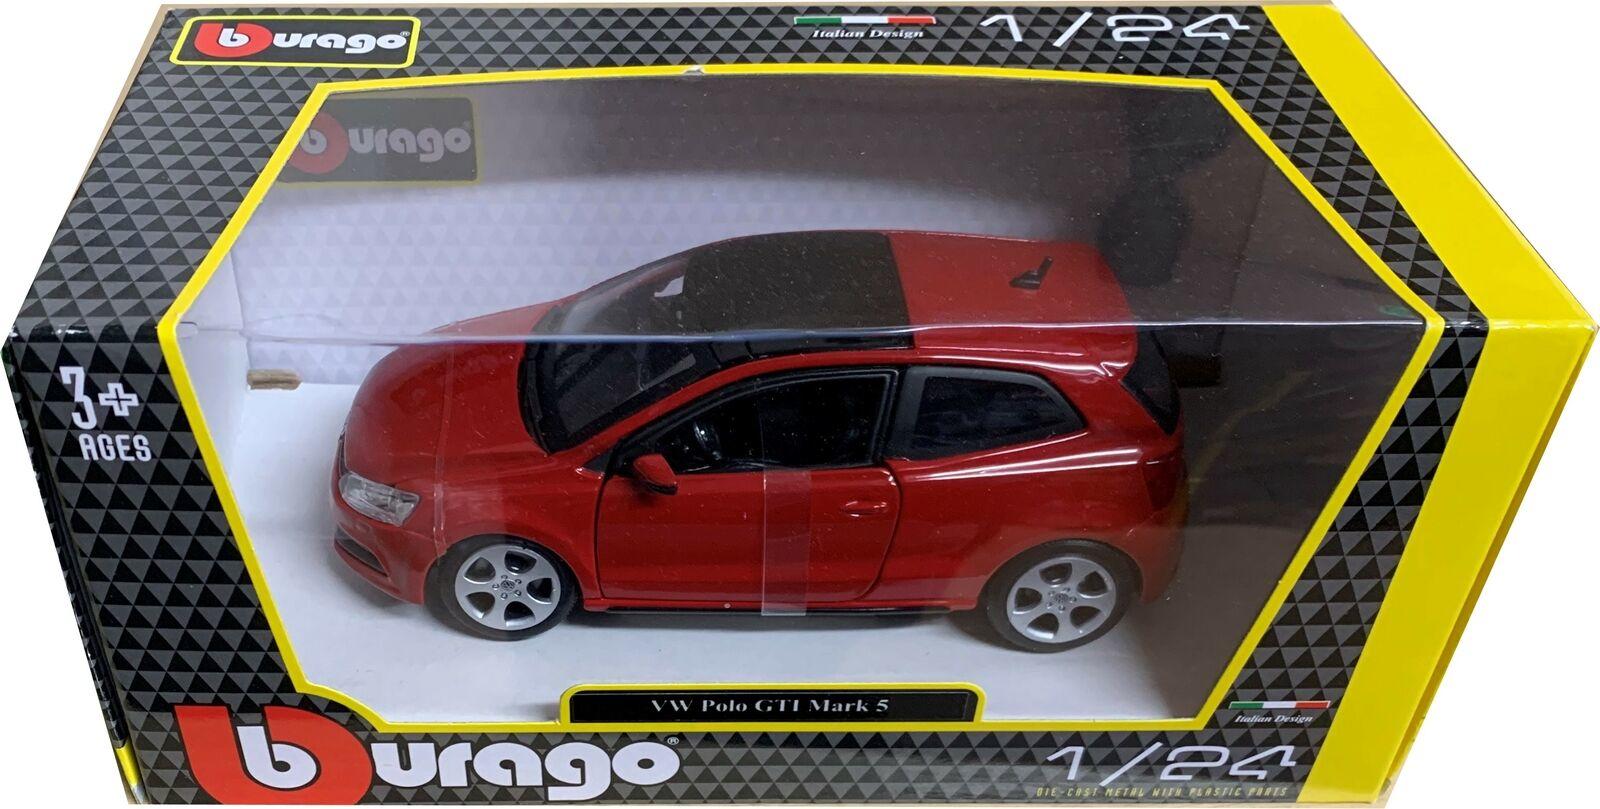 VW Polo GTi M5 in red 1:24 scale diecast car model from Bburago